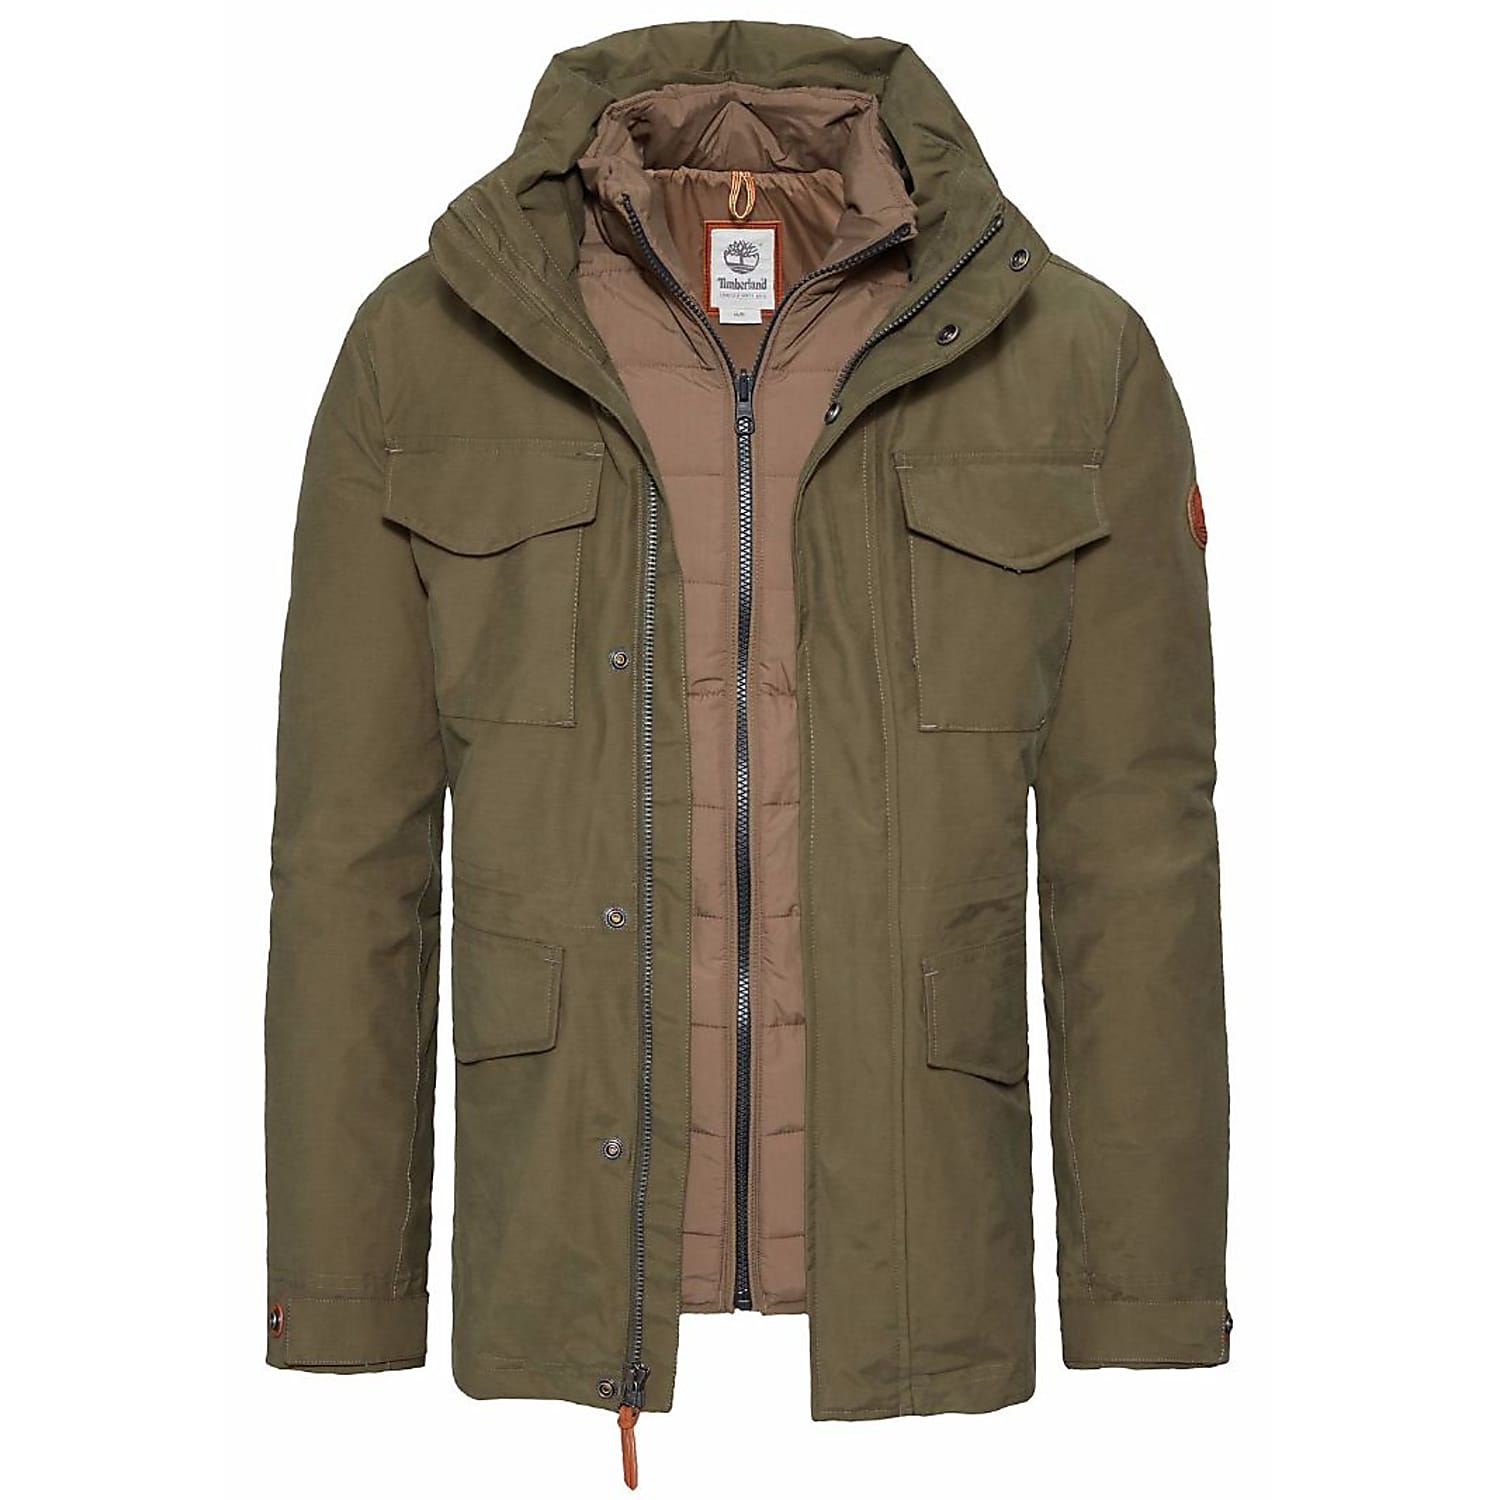 Timberland M SNOWDON PEAK M65 3-IN-1 JACKET, Olive Night - Season 2017 -  Fast and cheap shipping - www.exxpozed.com